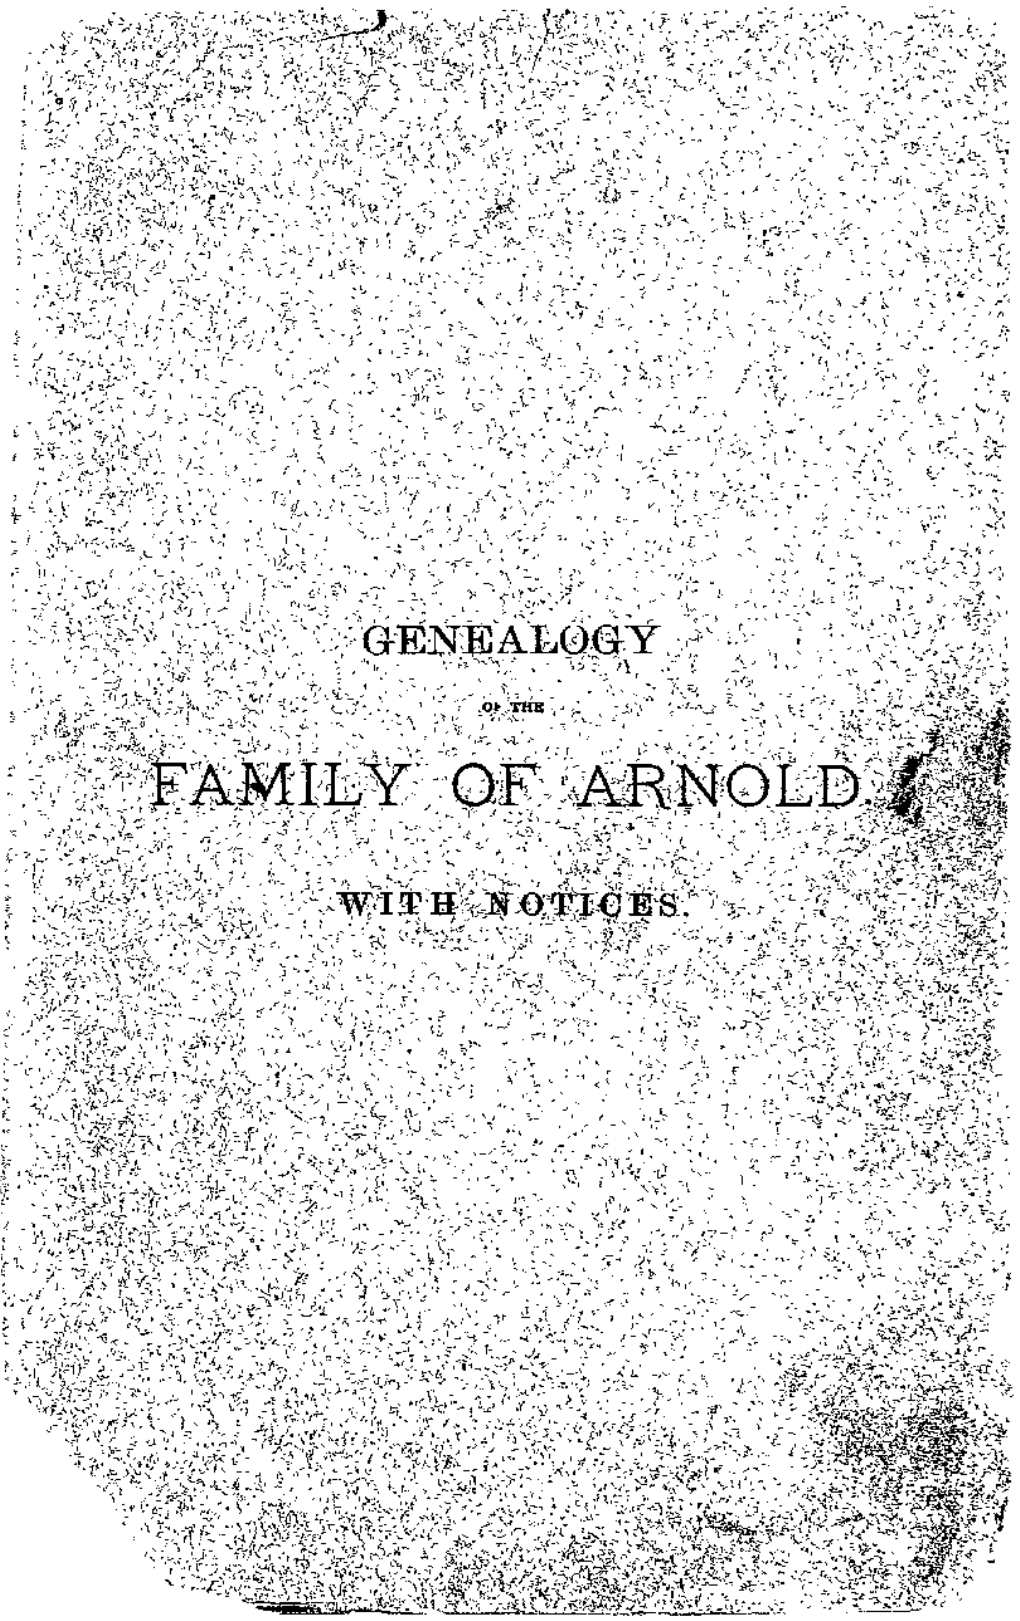 Genealogy of the Family of Arnold in Europe and America